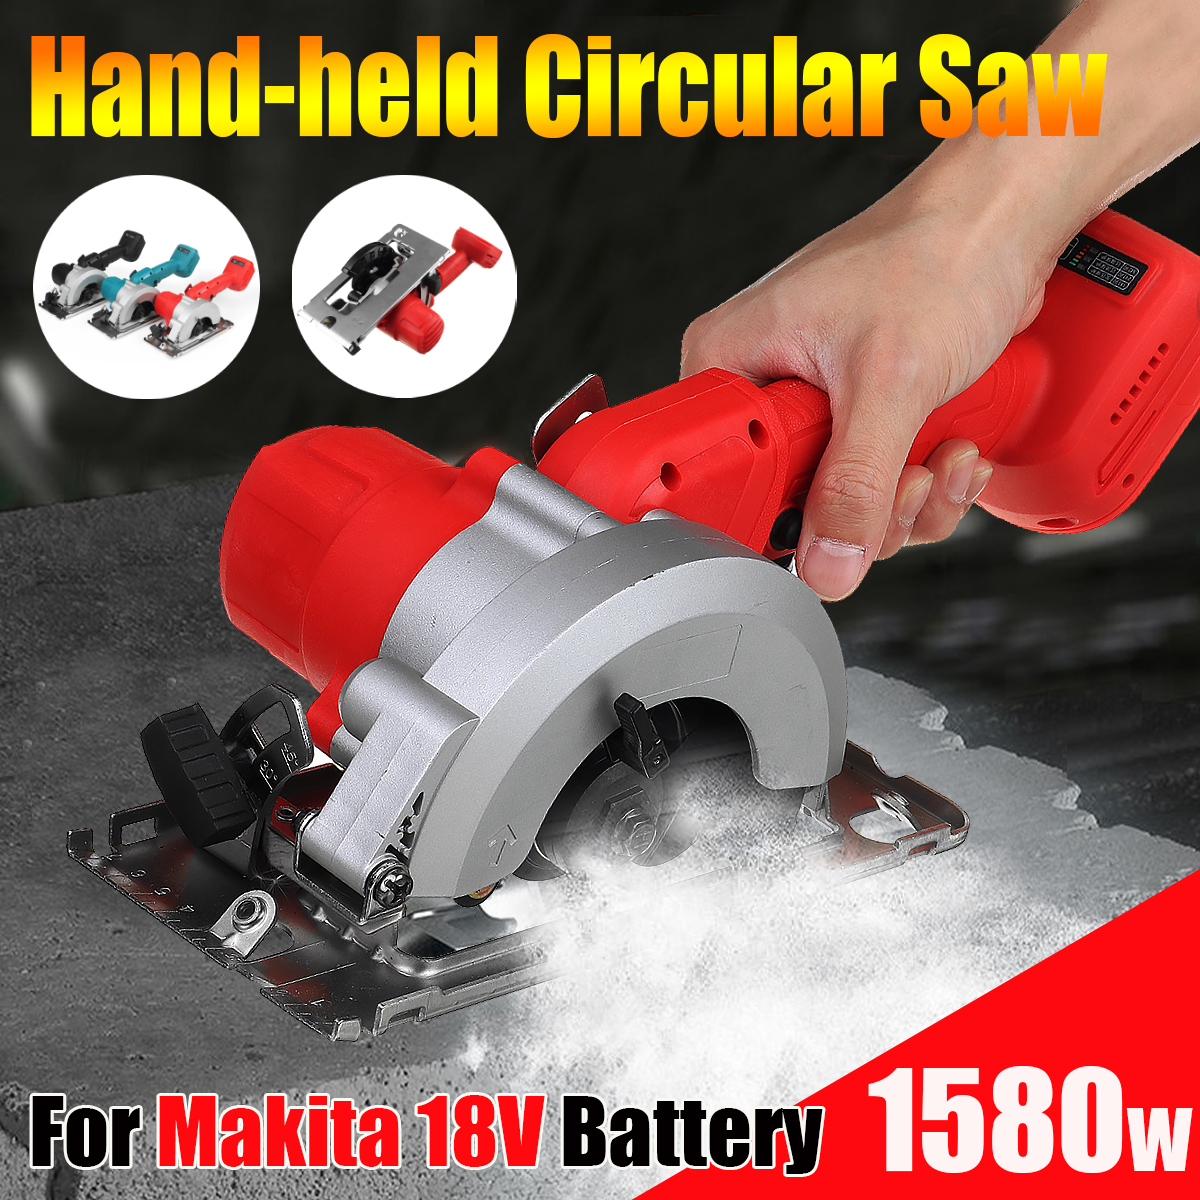 1580W-Cordless-Electric-Circular-Saw-Portable-Woodworking-Cutter-For-Makita-18V-Battery-1786906-2